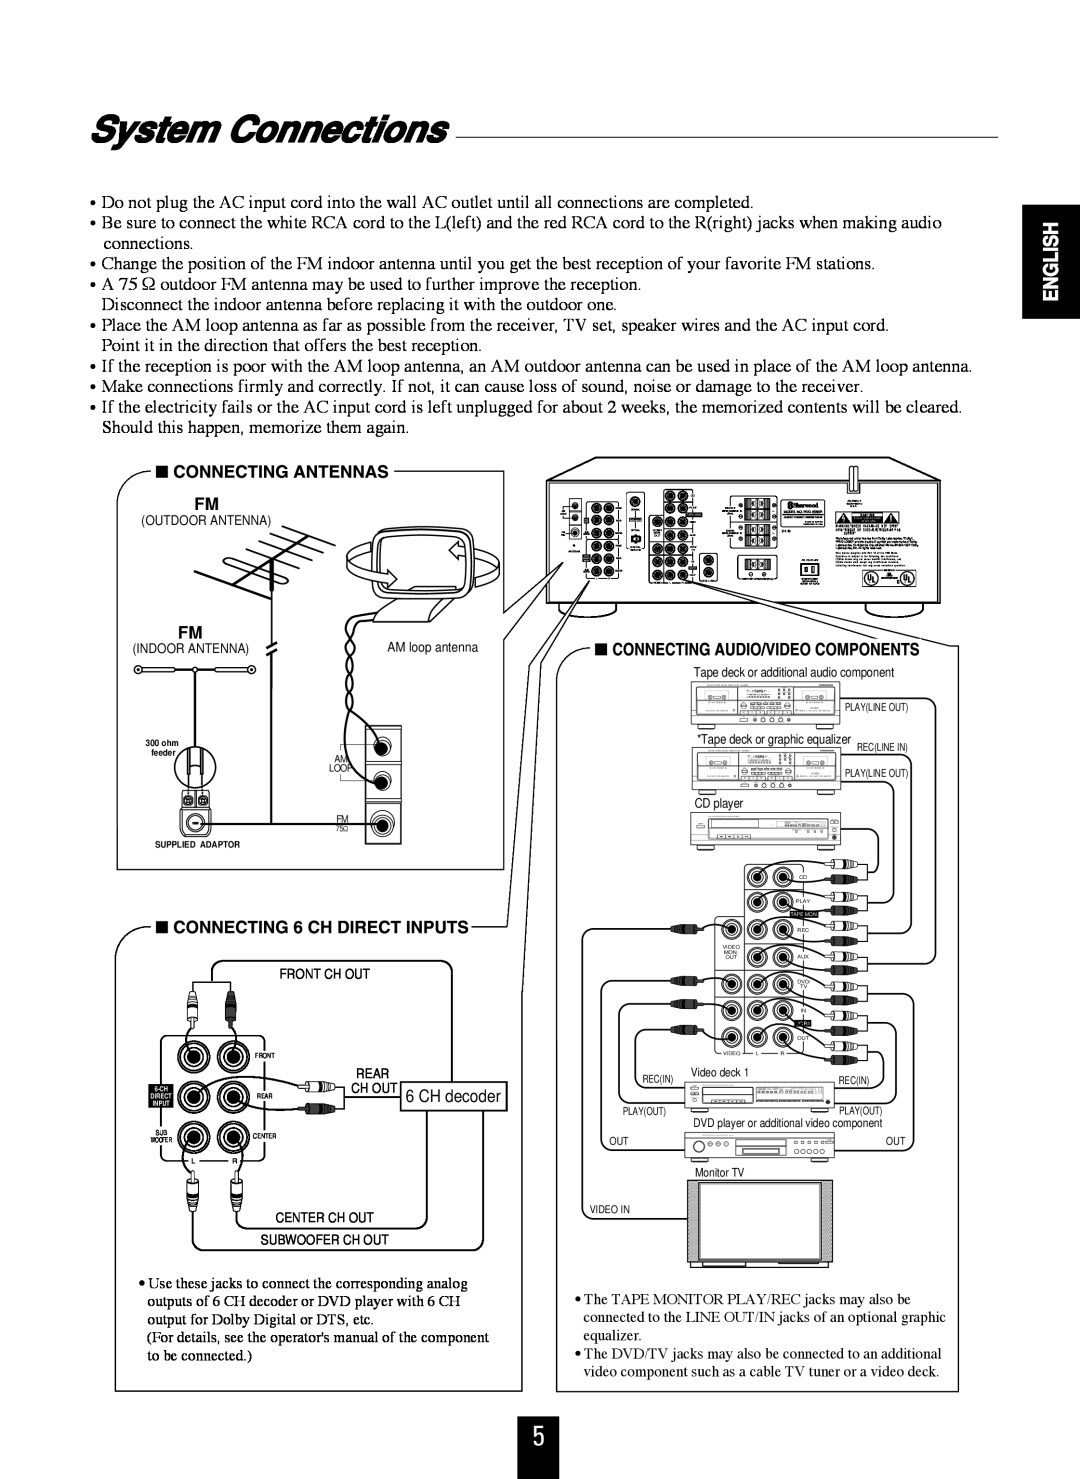 Sherwood RVD-6090R operating instructions System Connections, English 